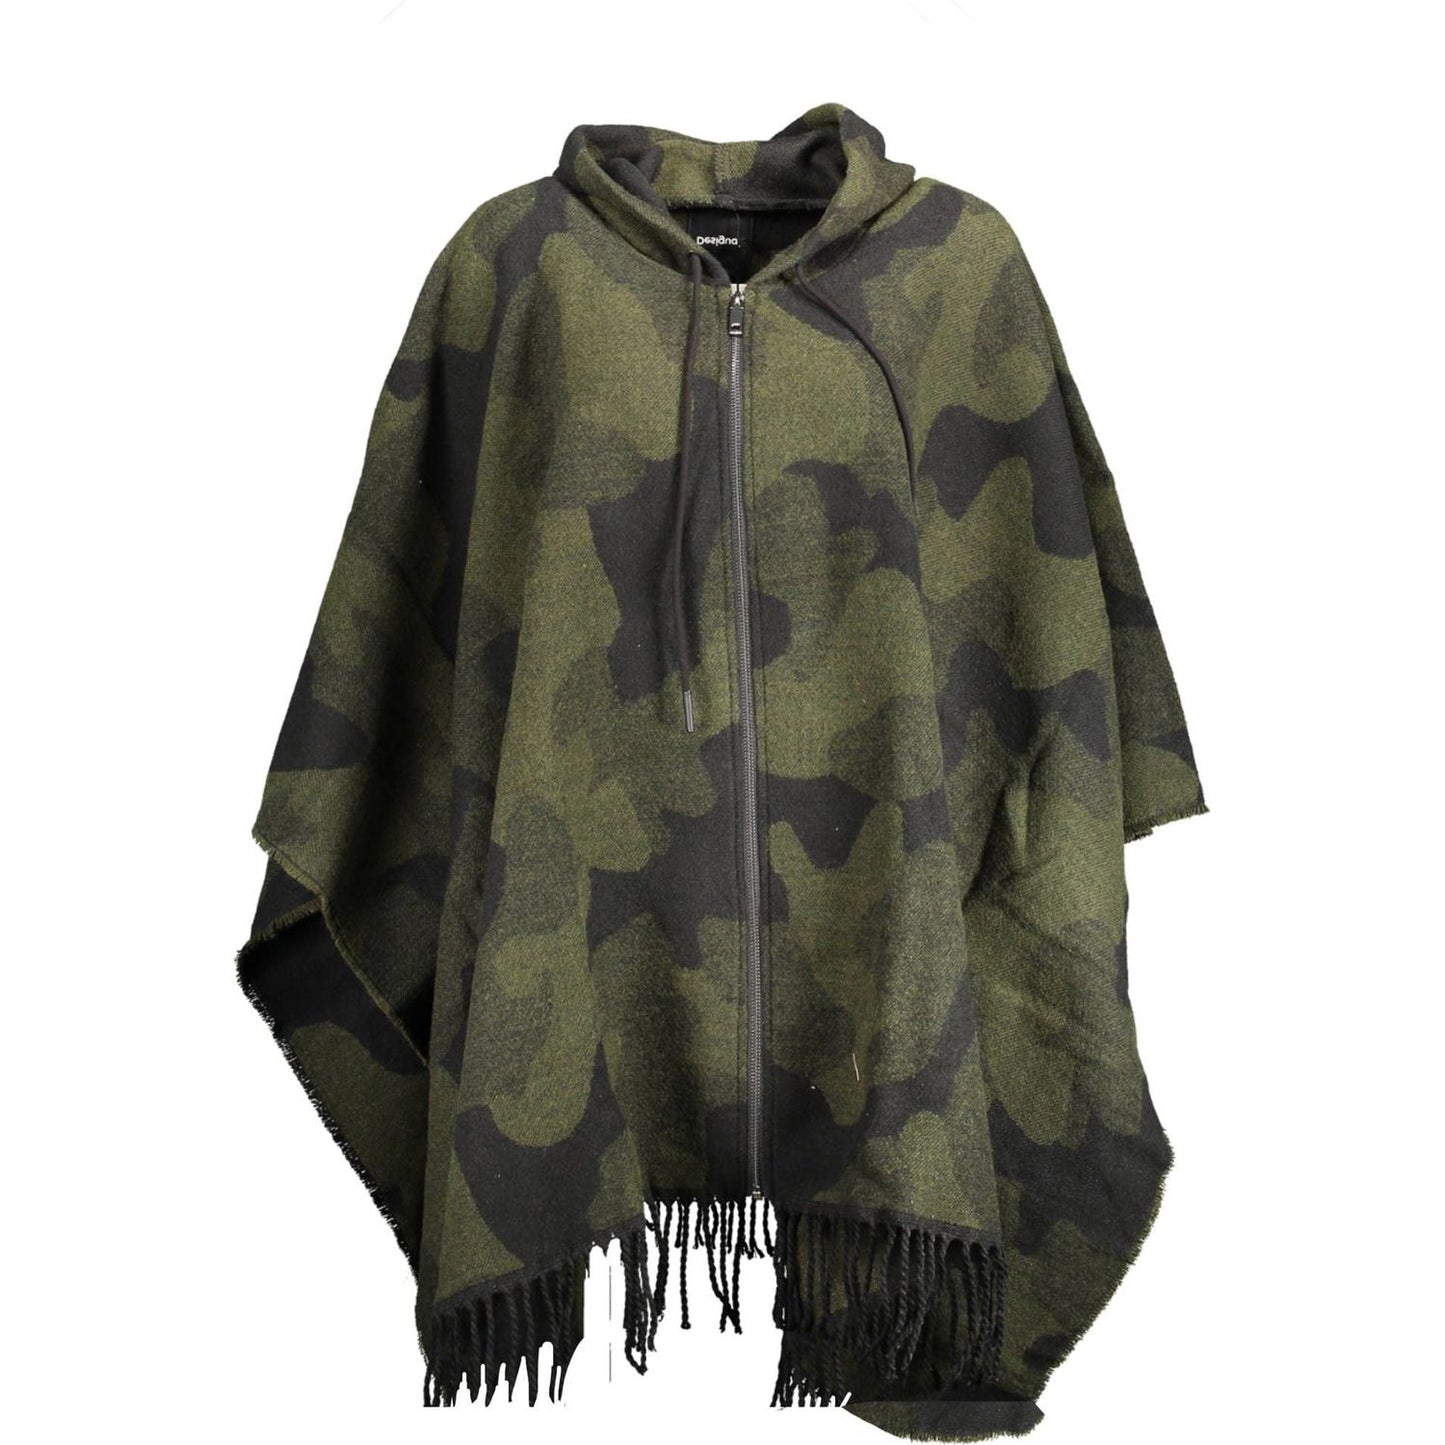 Desigual Chic Contrasting Poncho with Hood and Zip Details chic-contrasting-poncho-with-hood-and-zip-details